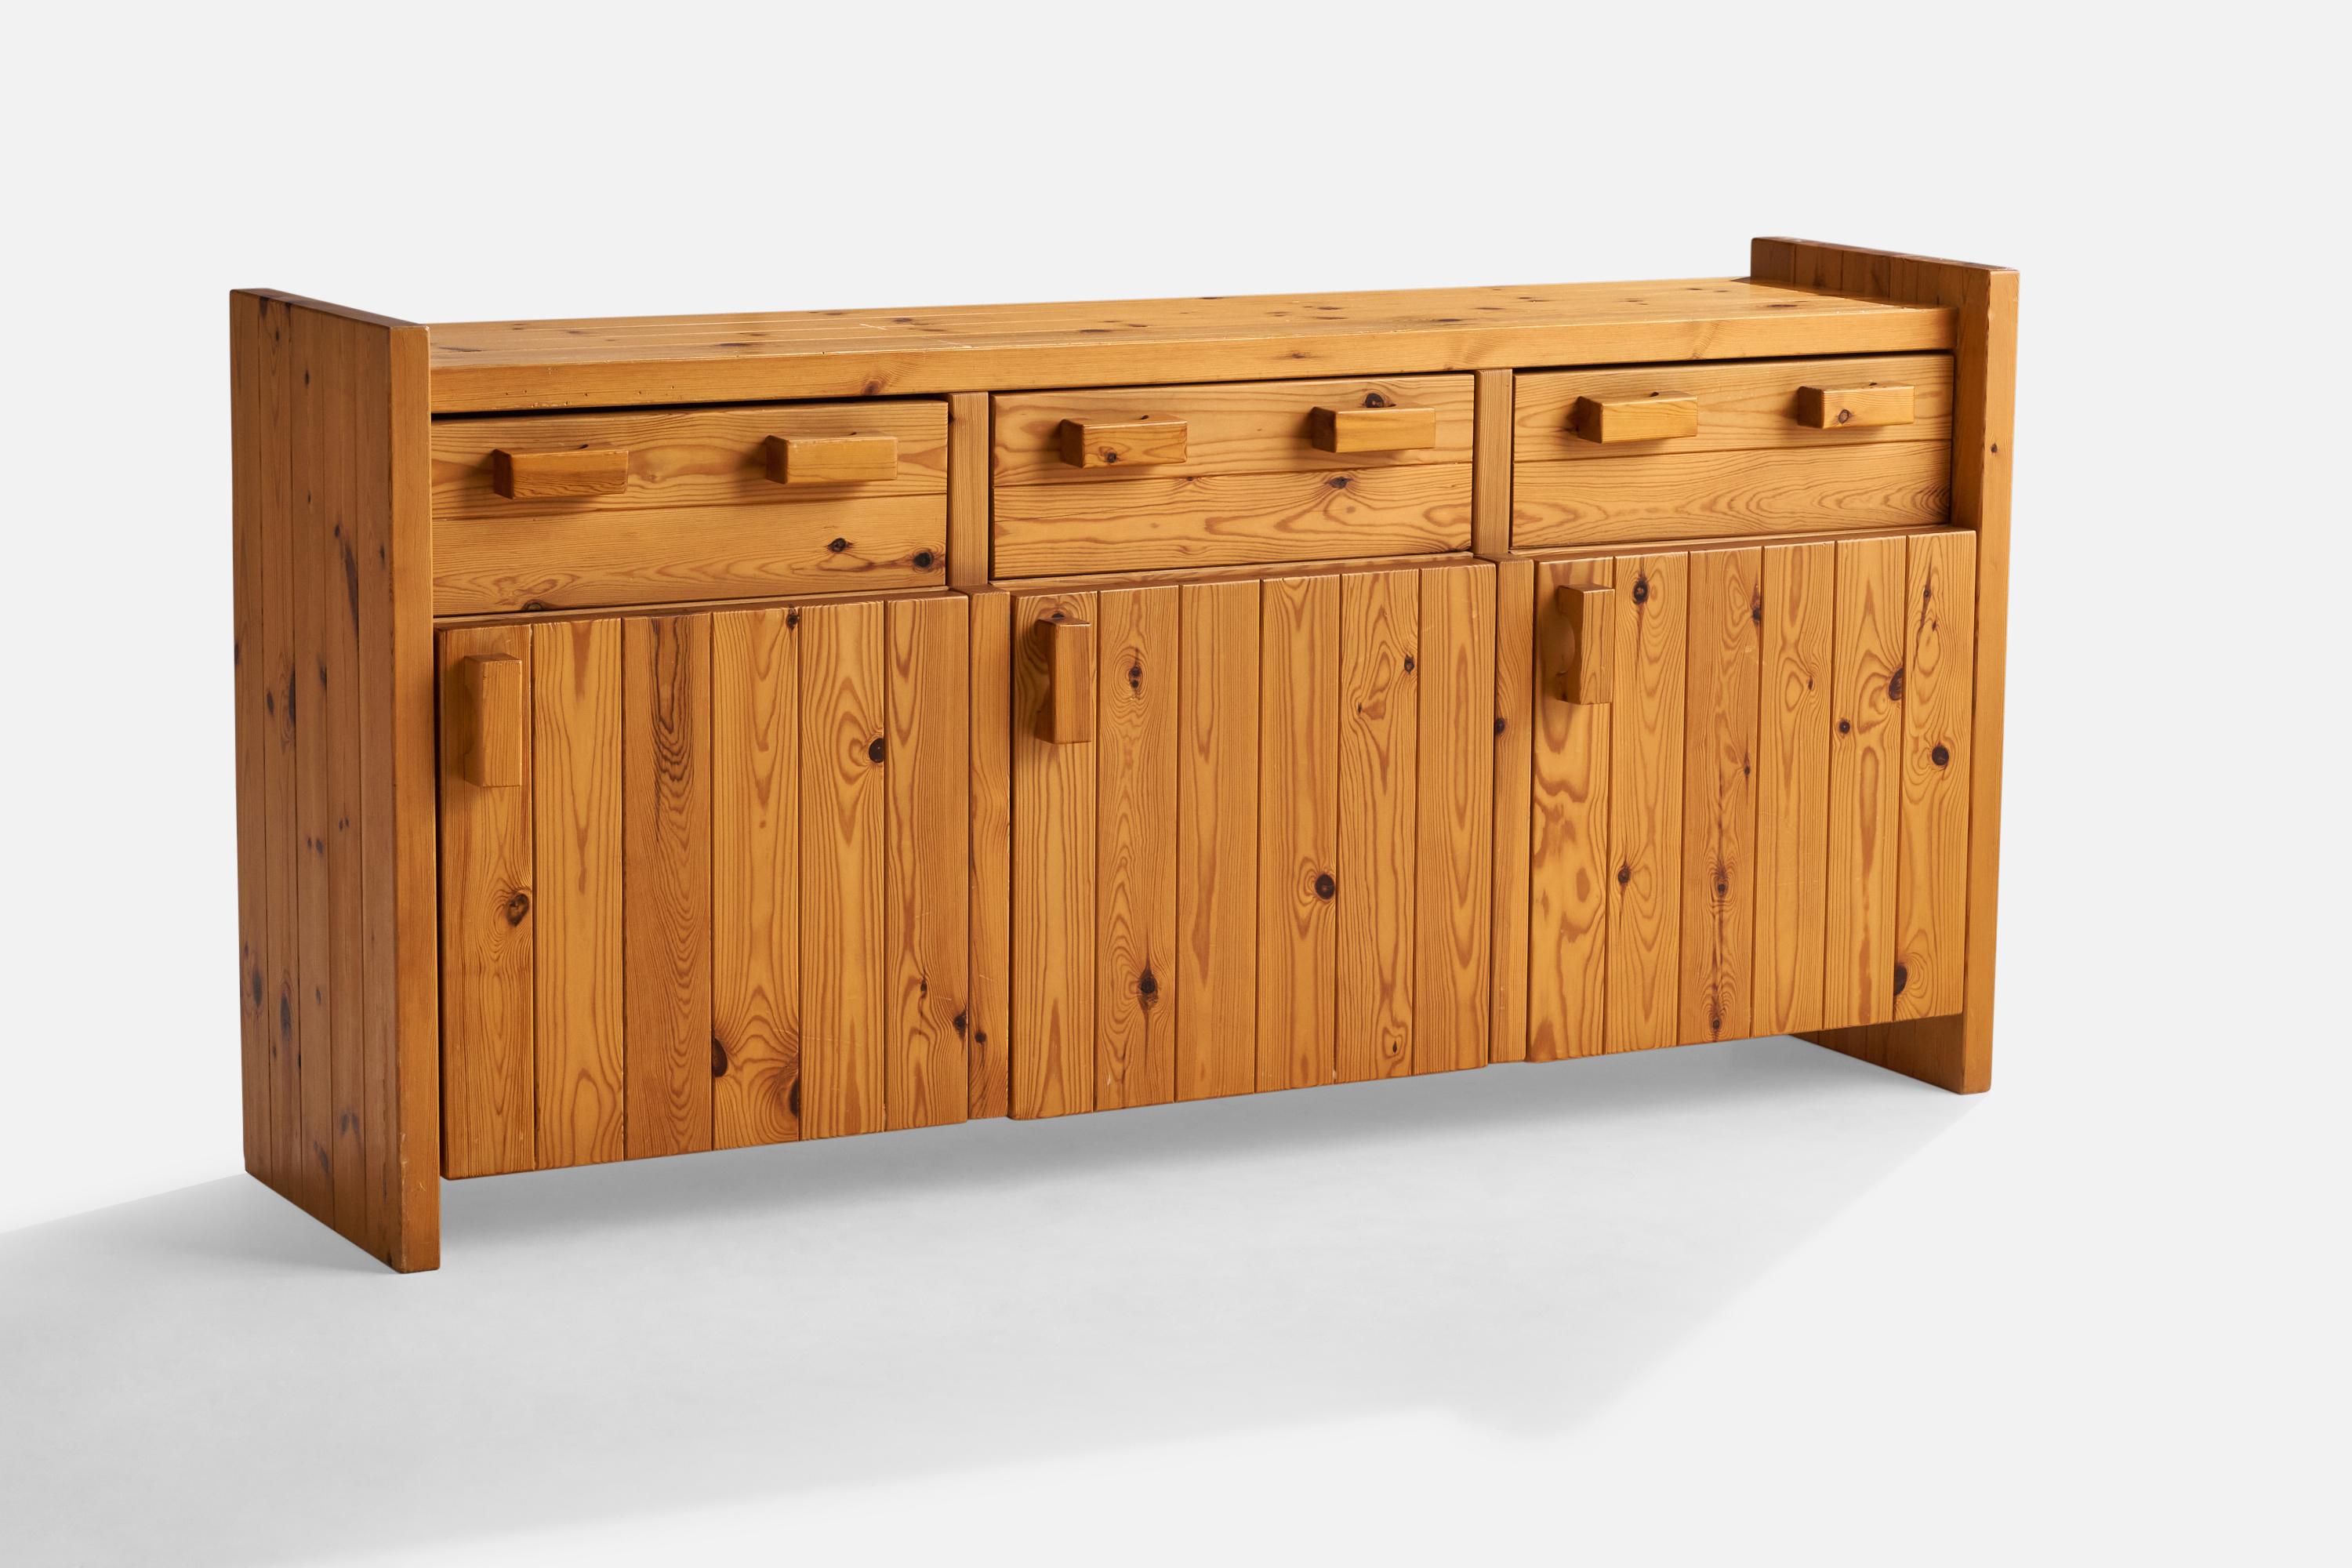 A pine cabinet designed and produced in Denmark, c. 1970s.